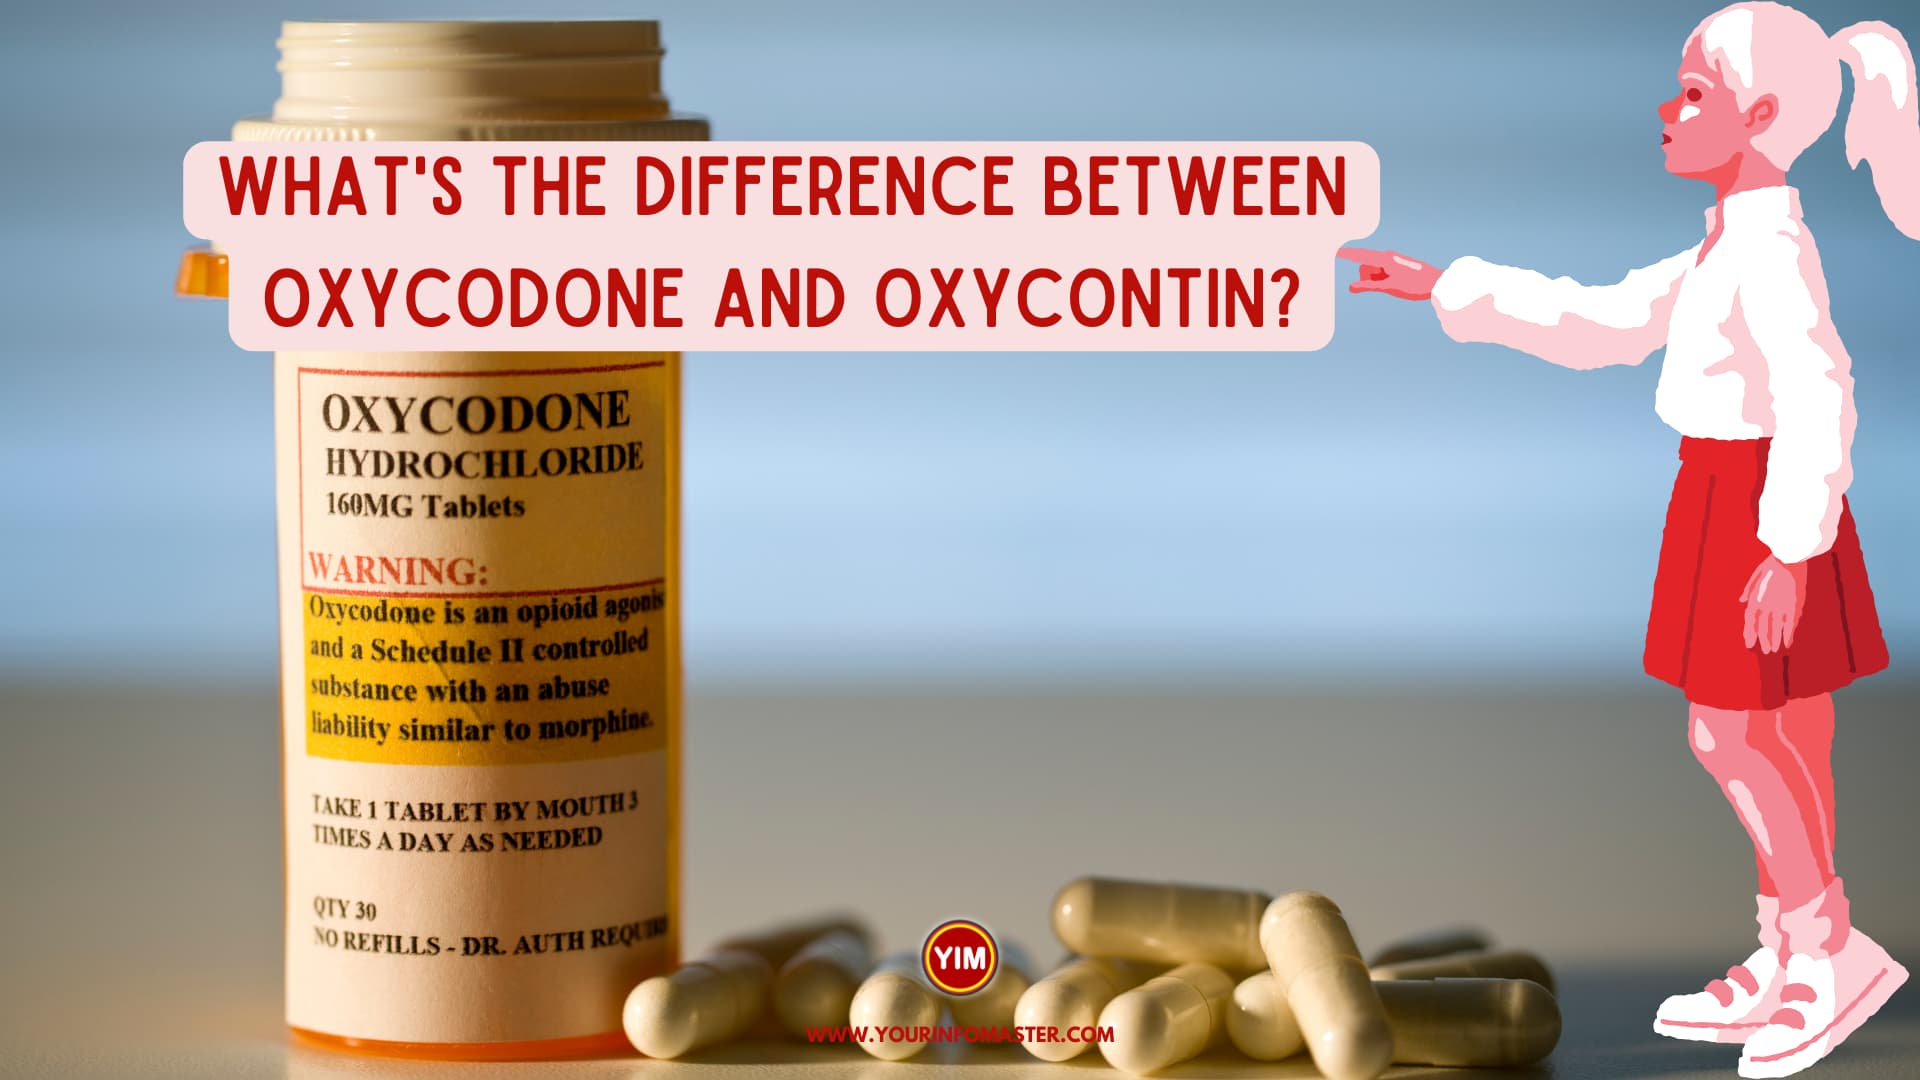 What is the difference between oxycodone and oxycontin